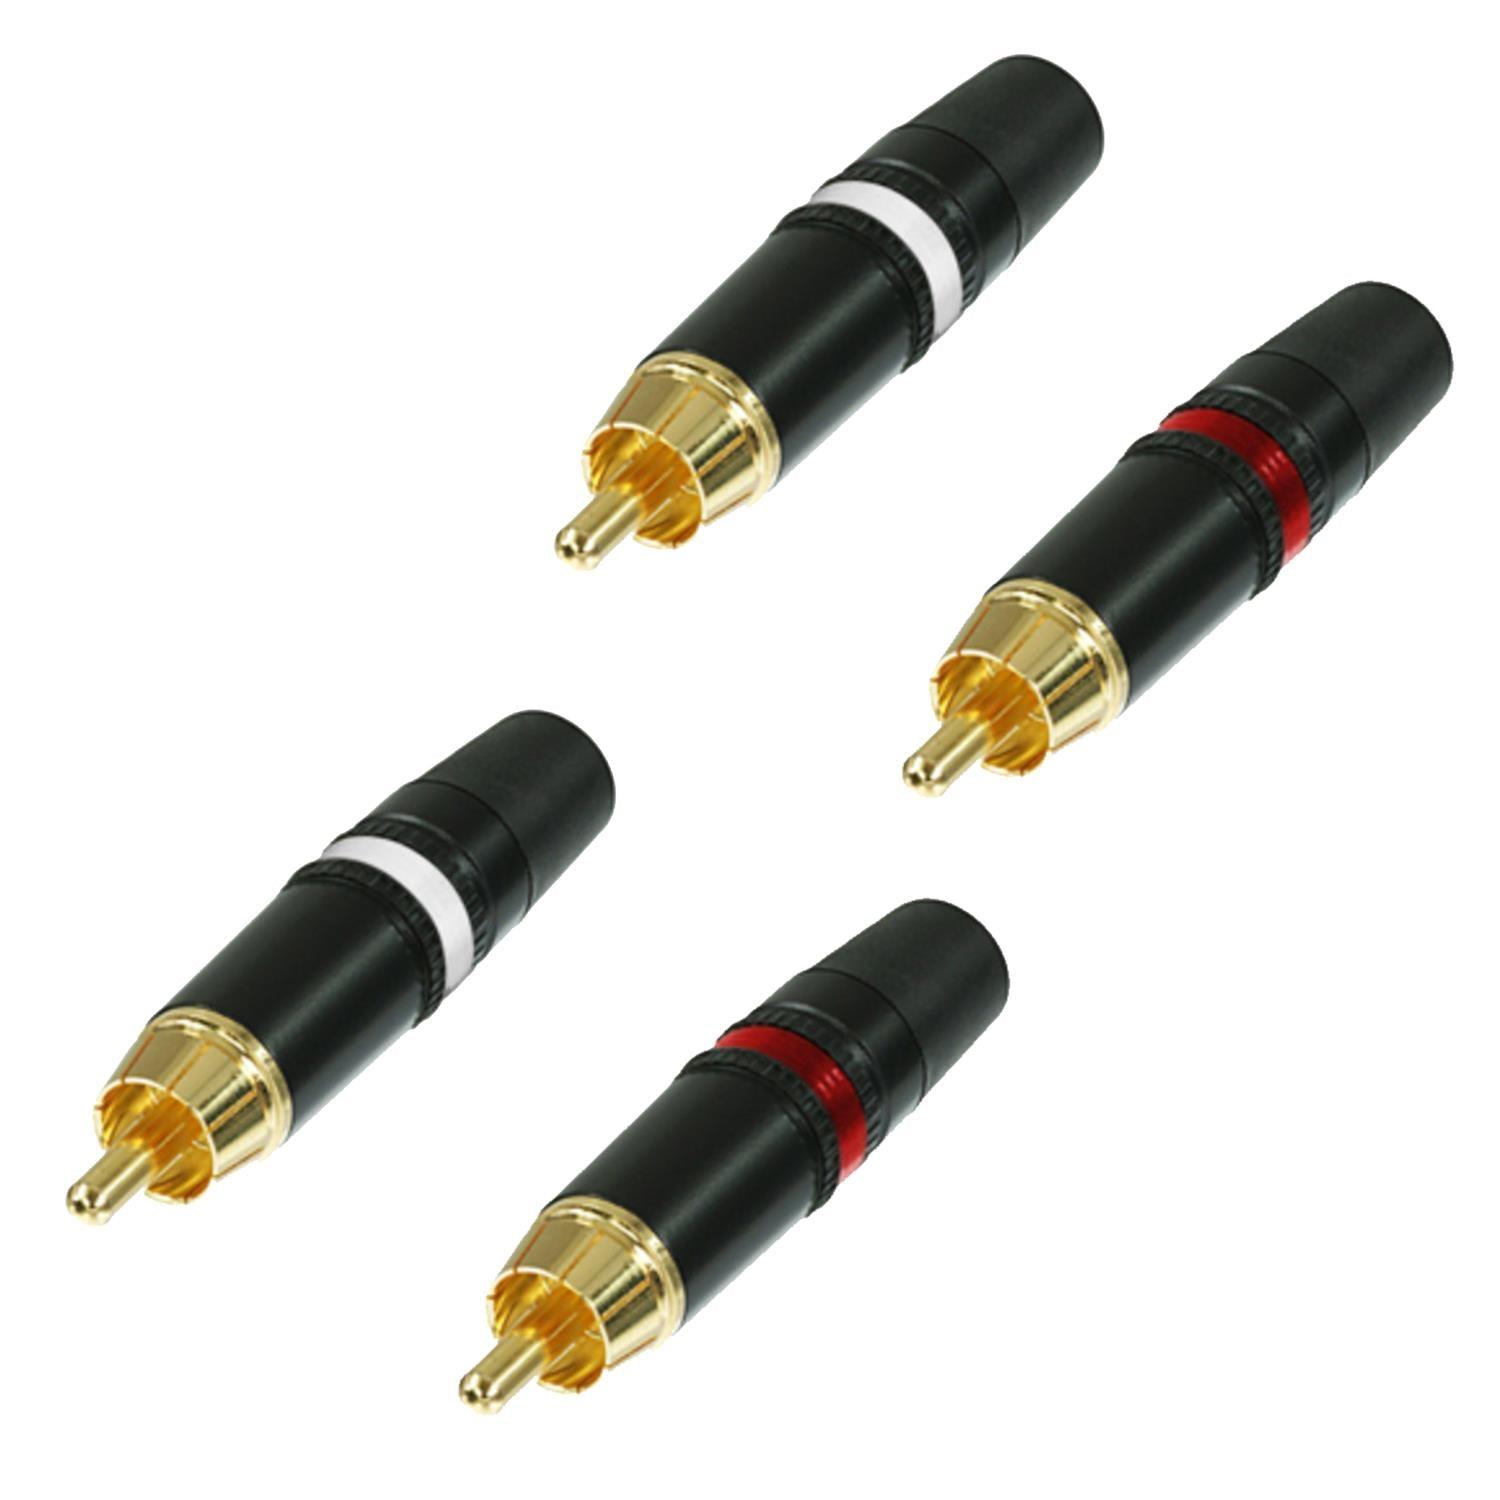 4 x Neutrik NYS373 Red & White REAN Phono Plug with Gold Plated Contacts - DY Pro Audio